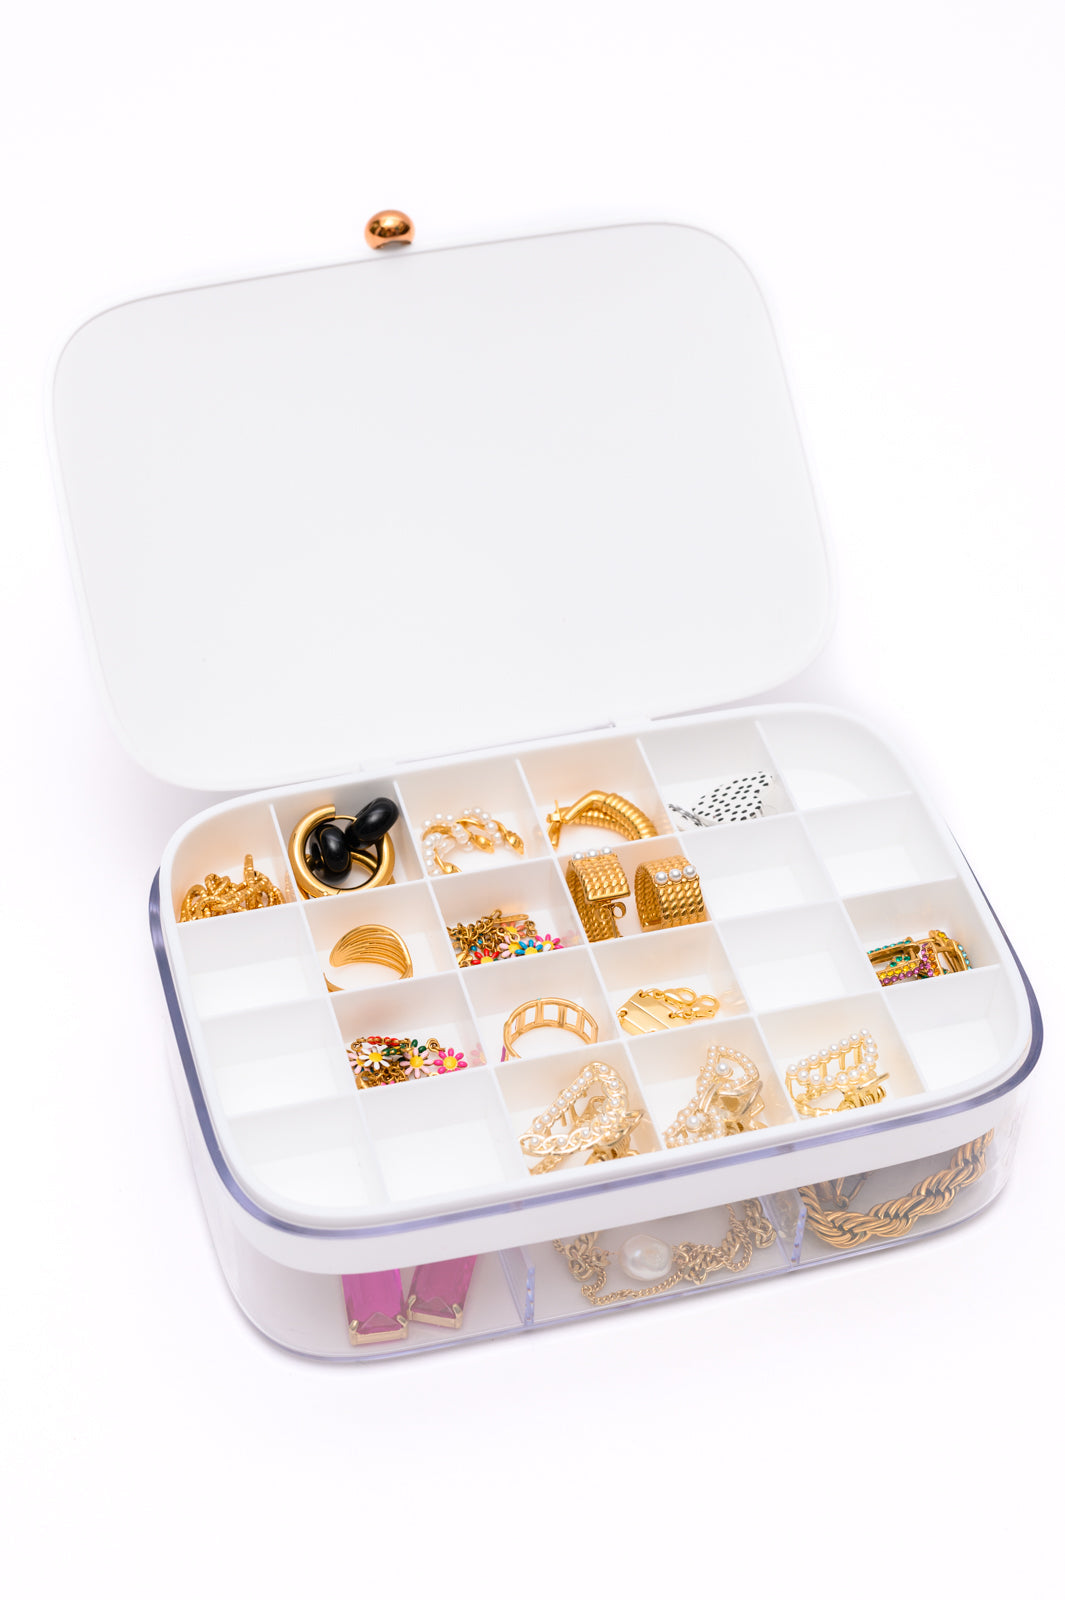 All Sorted Out Jewelry Storage Case | White